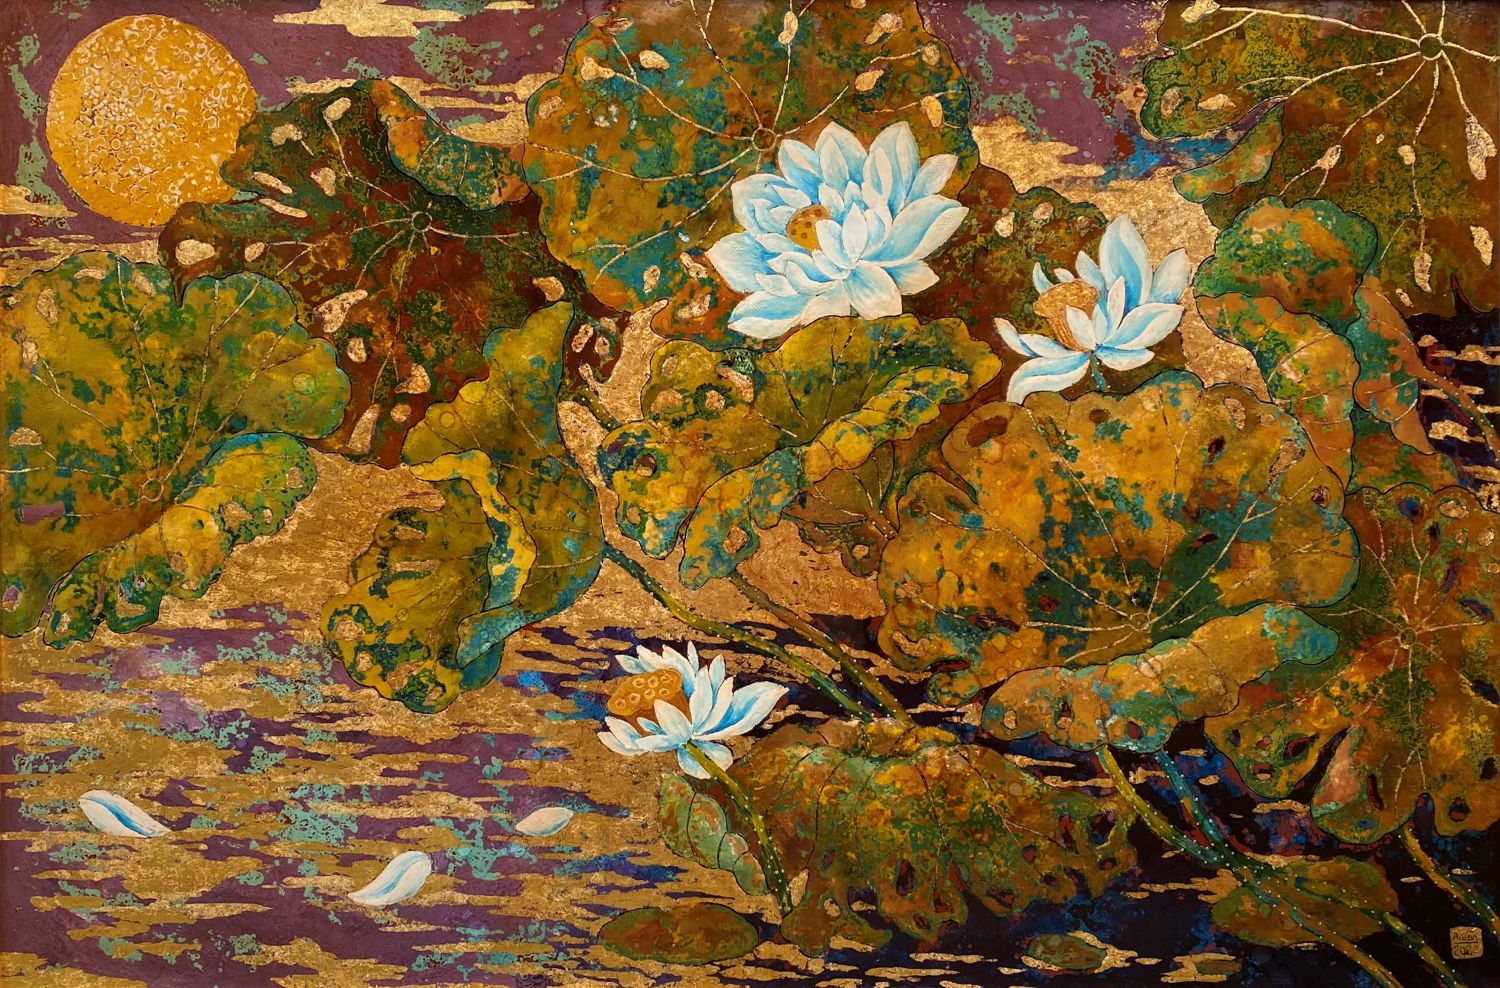 Night of The Summer - Vietnamese Lacquer Painting by Artist Chau Ai Van